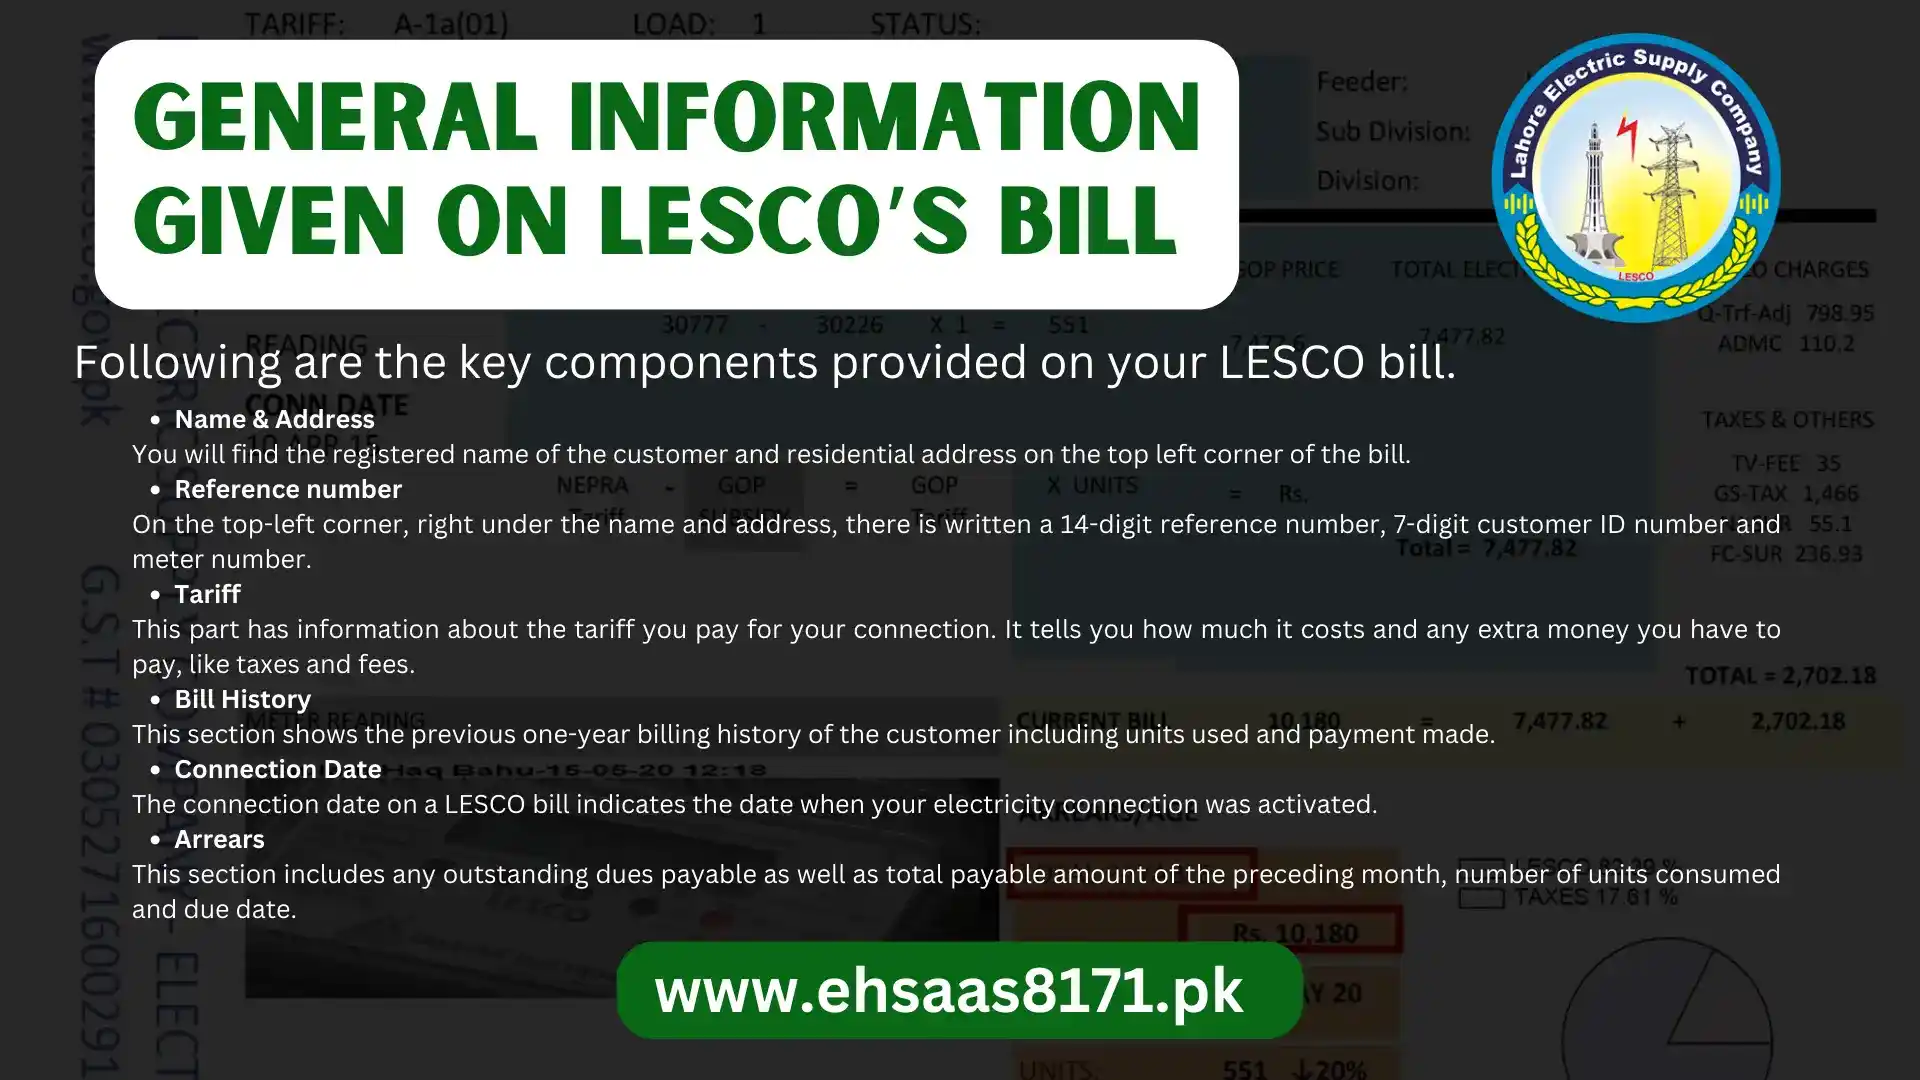 General Information Given on LESCO’s Bill